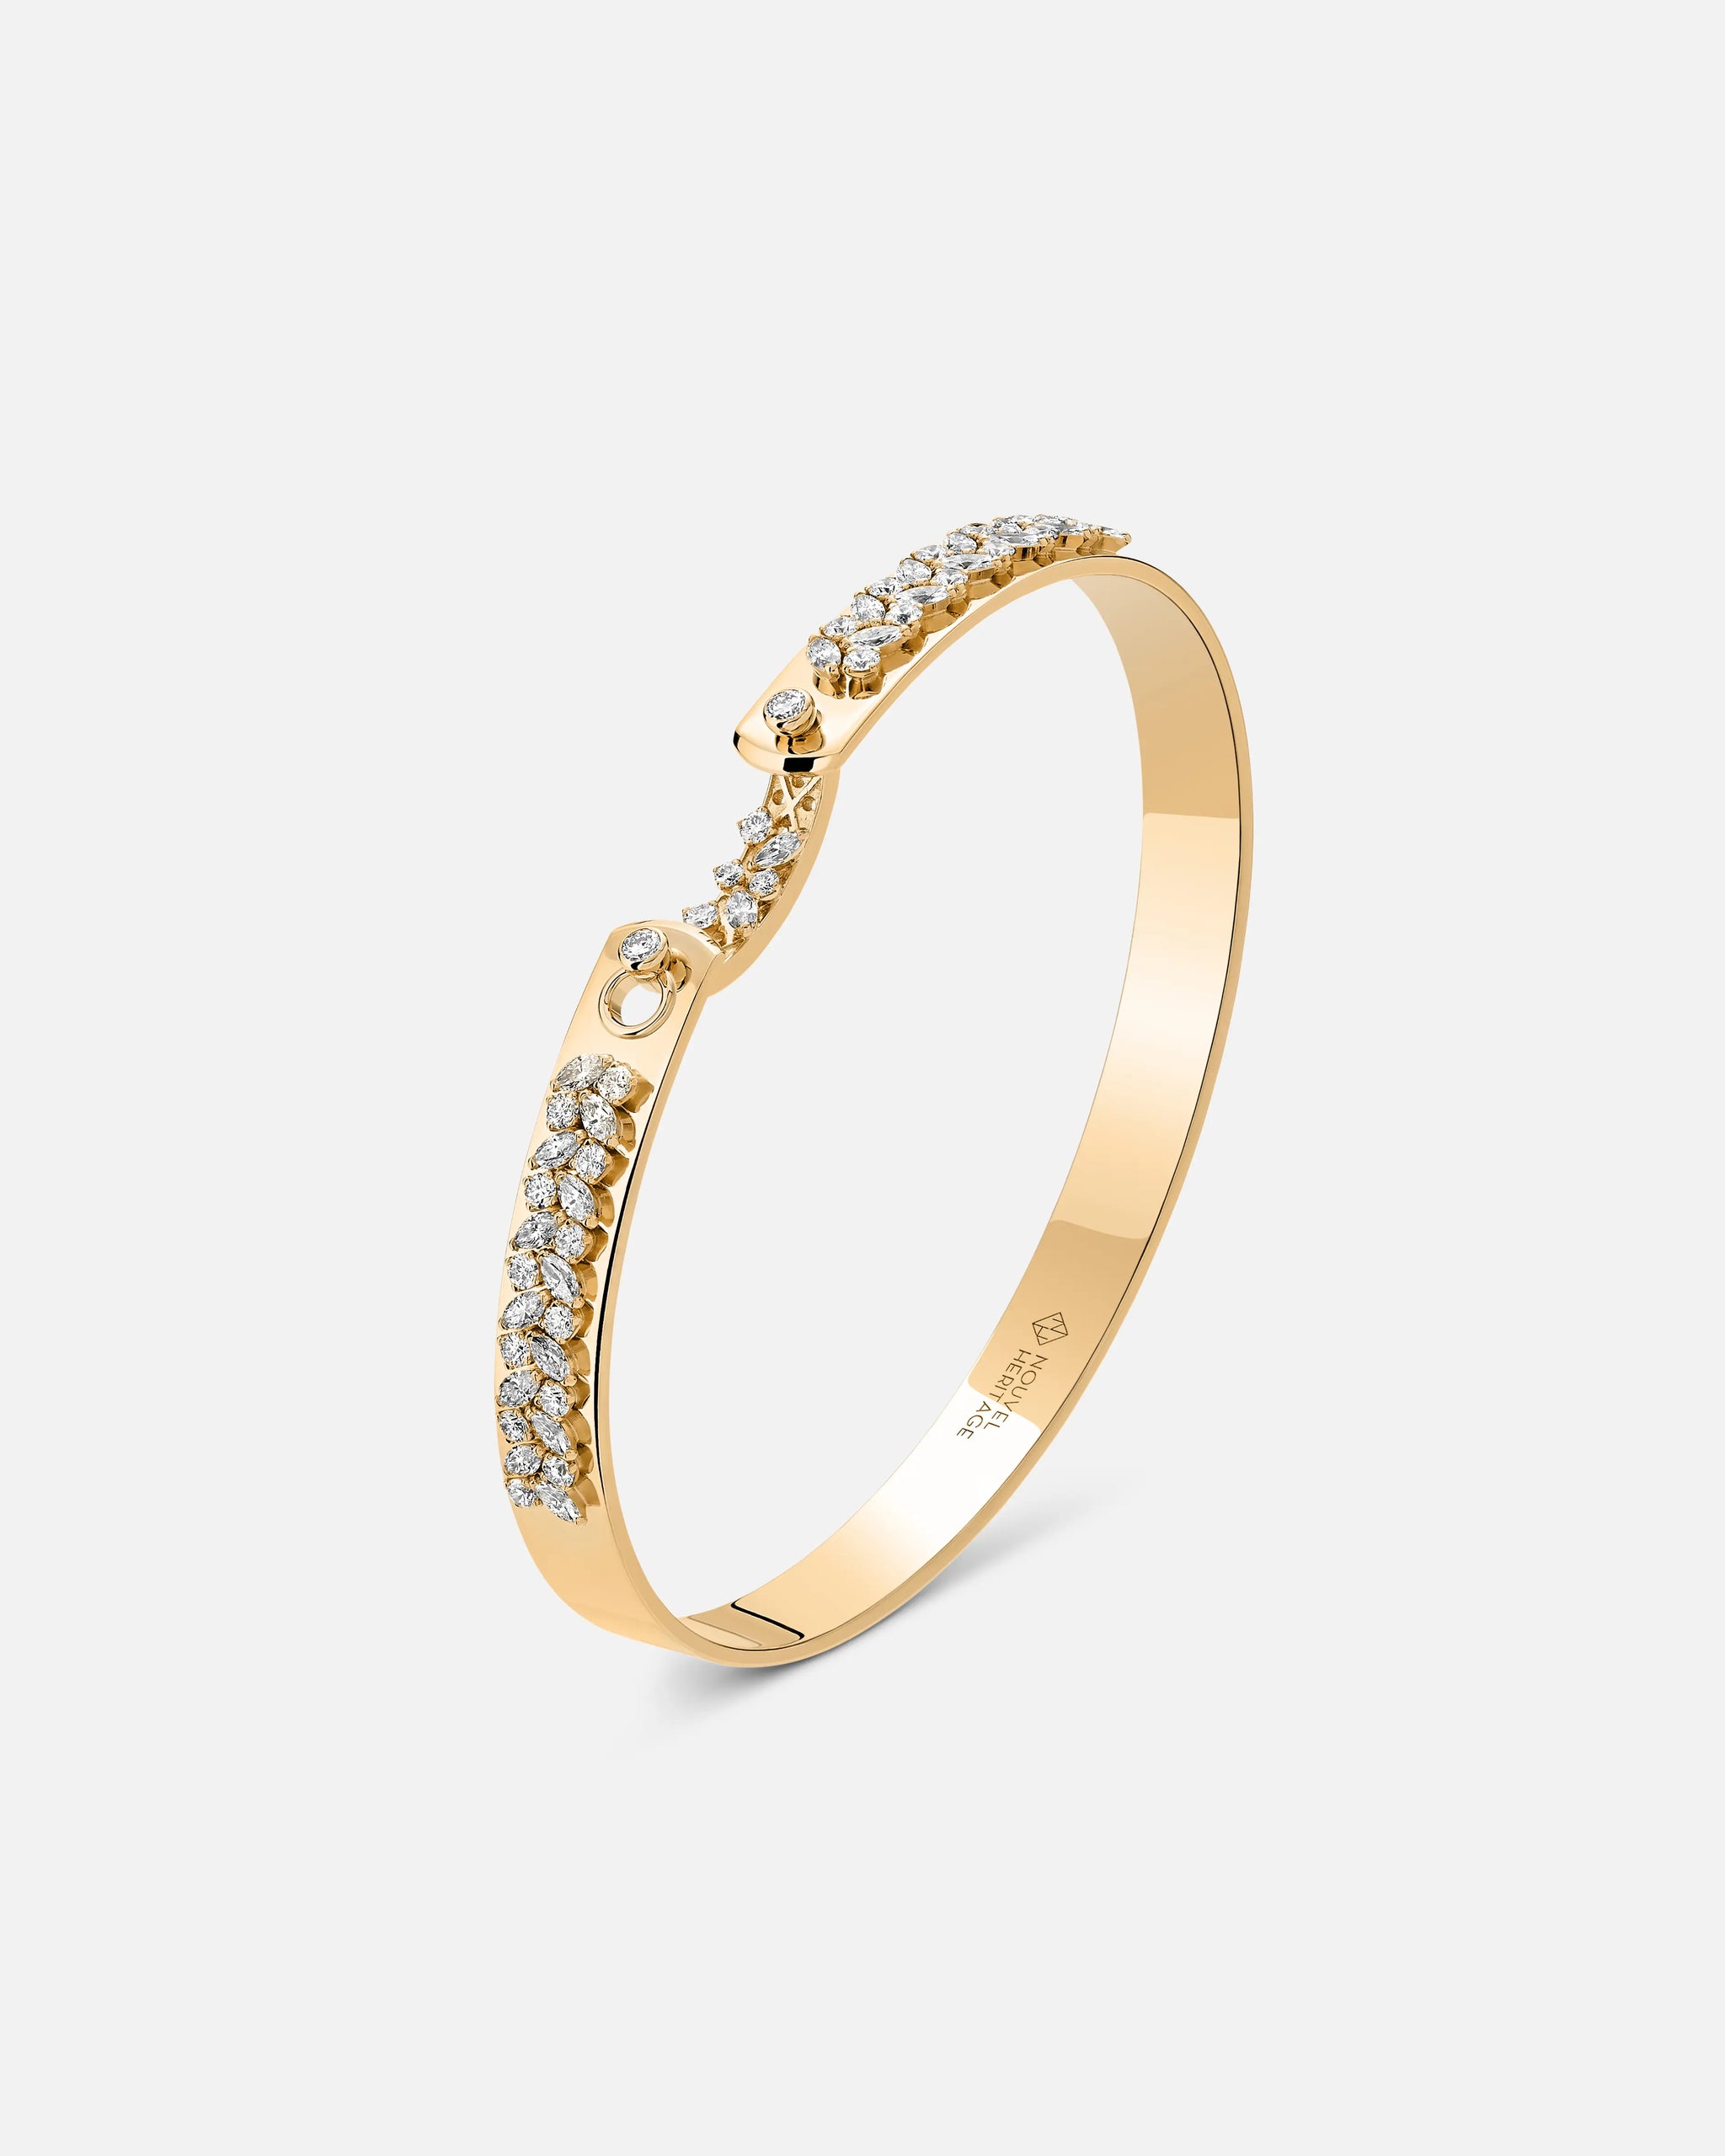 Soirée Mood Bangle in Yellow Gold - 1 - Nouvel Heritage